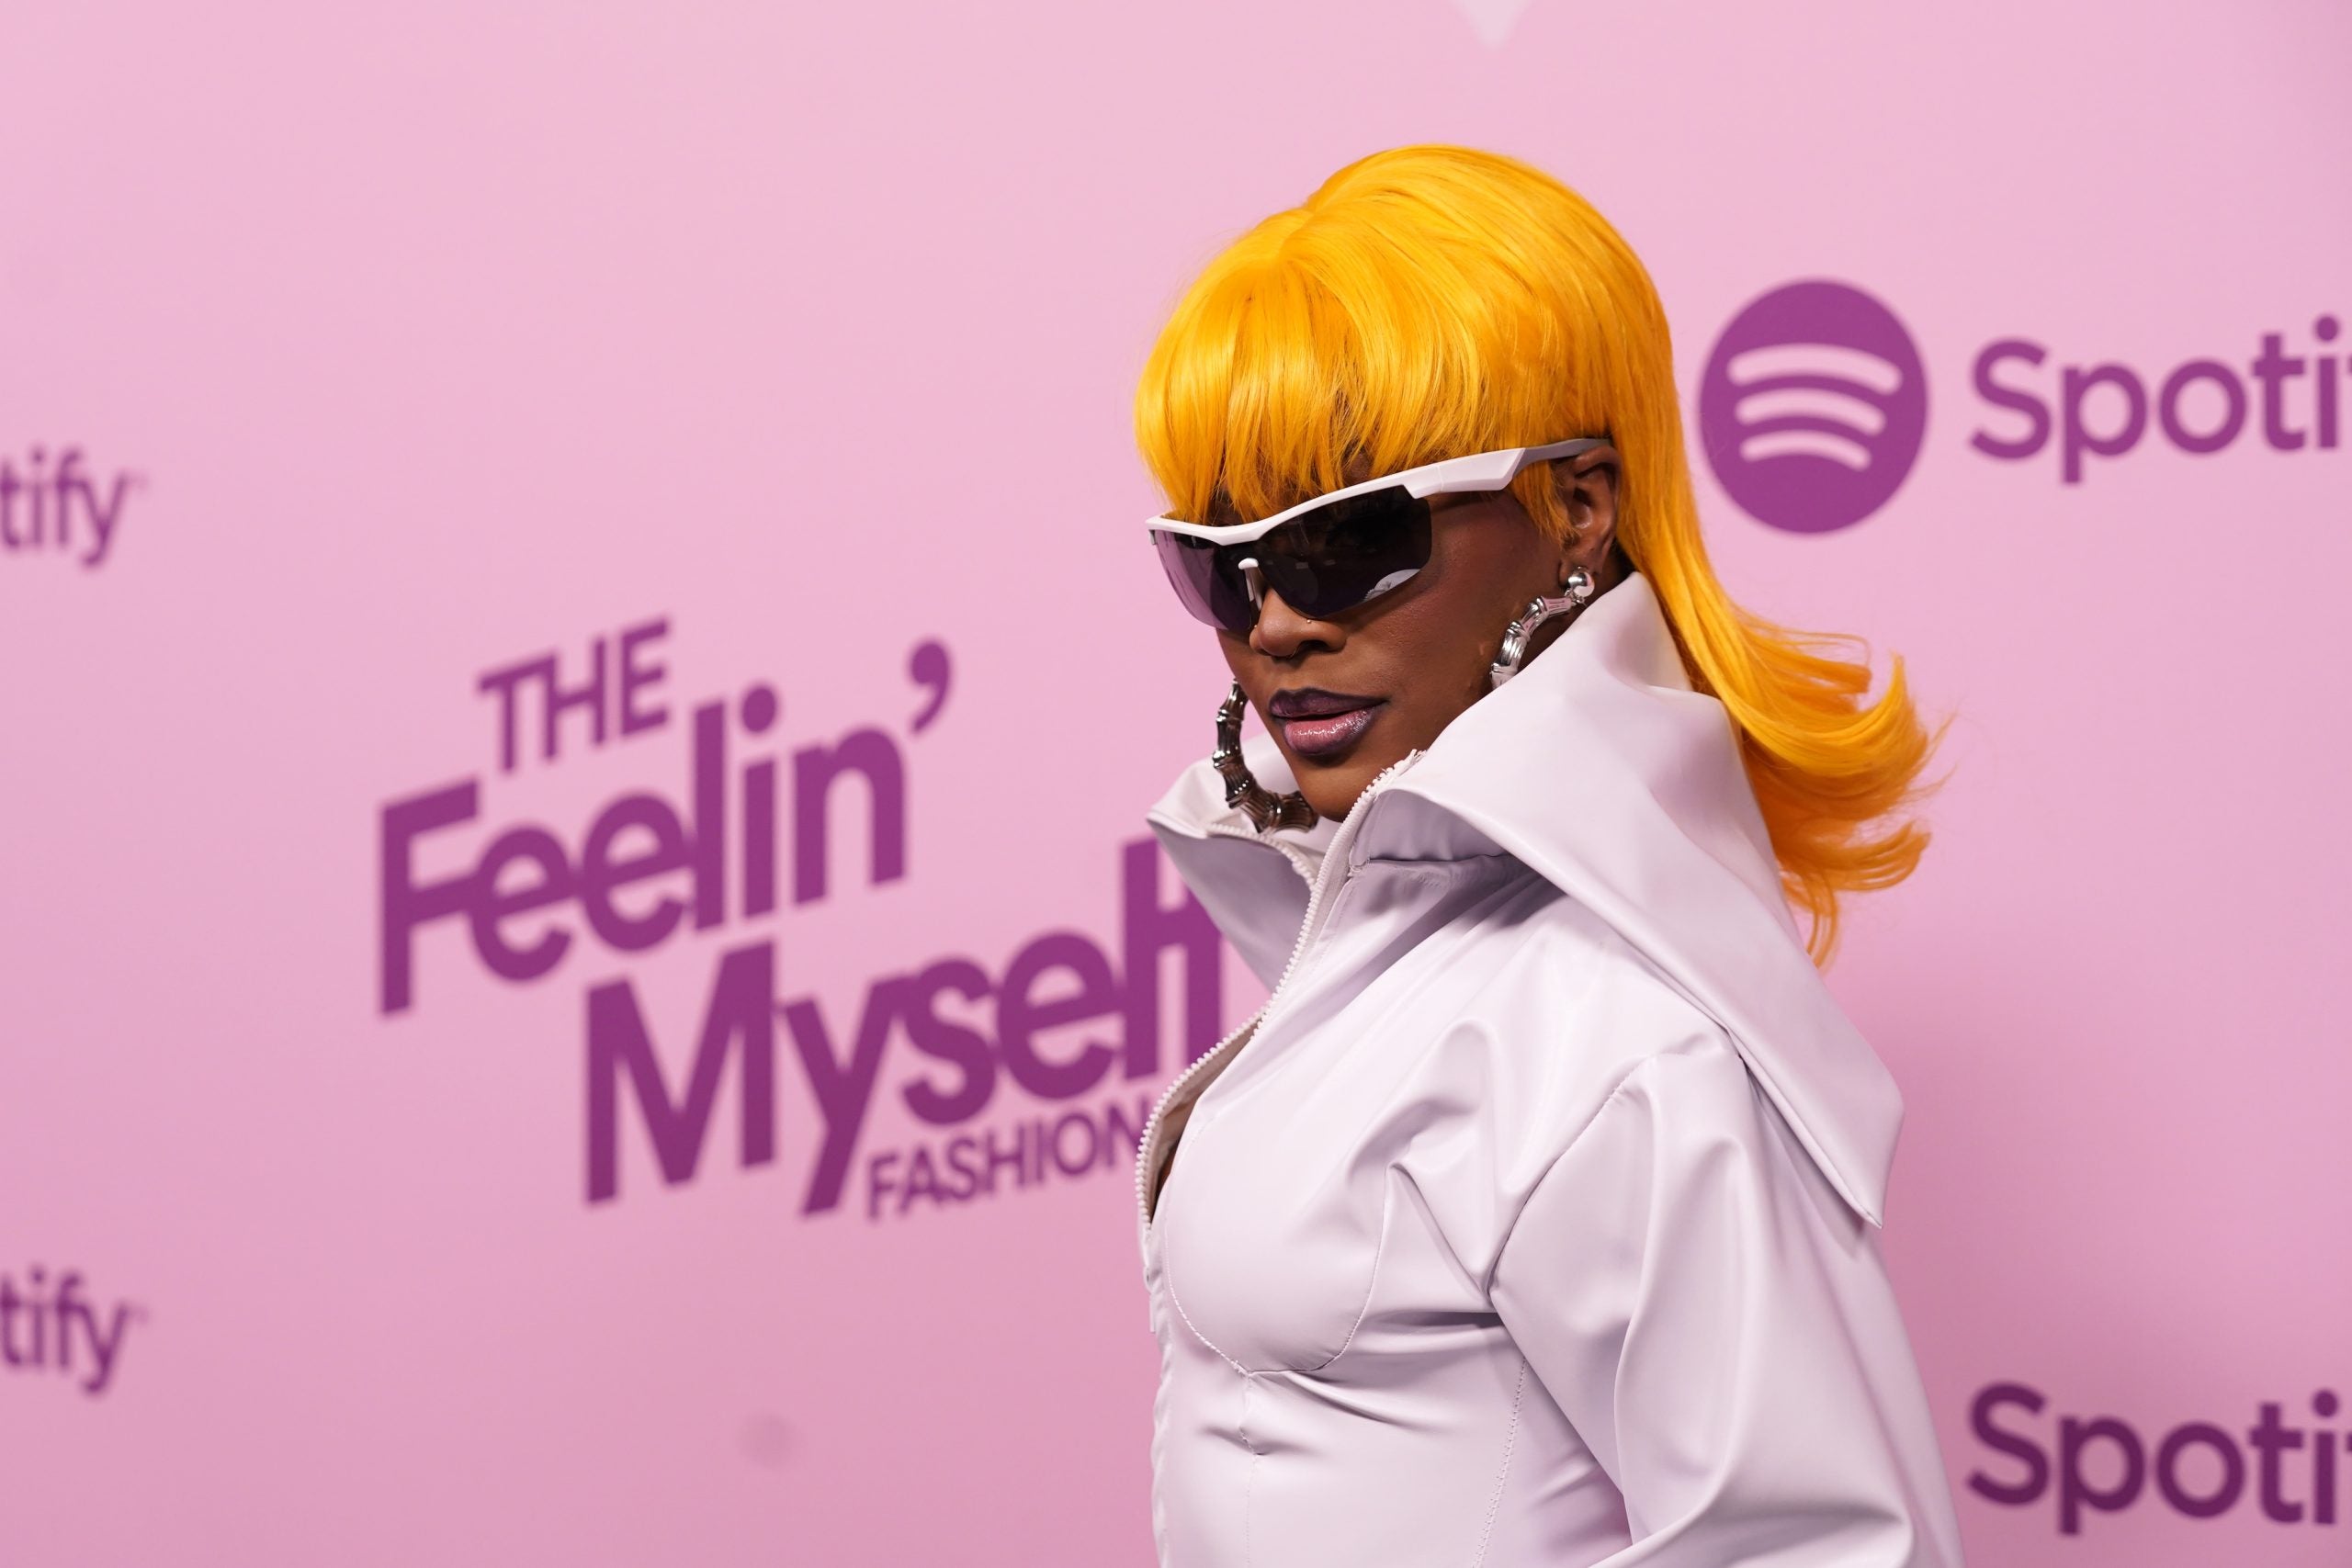 All The Looks From Spotify's Fashion Show